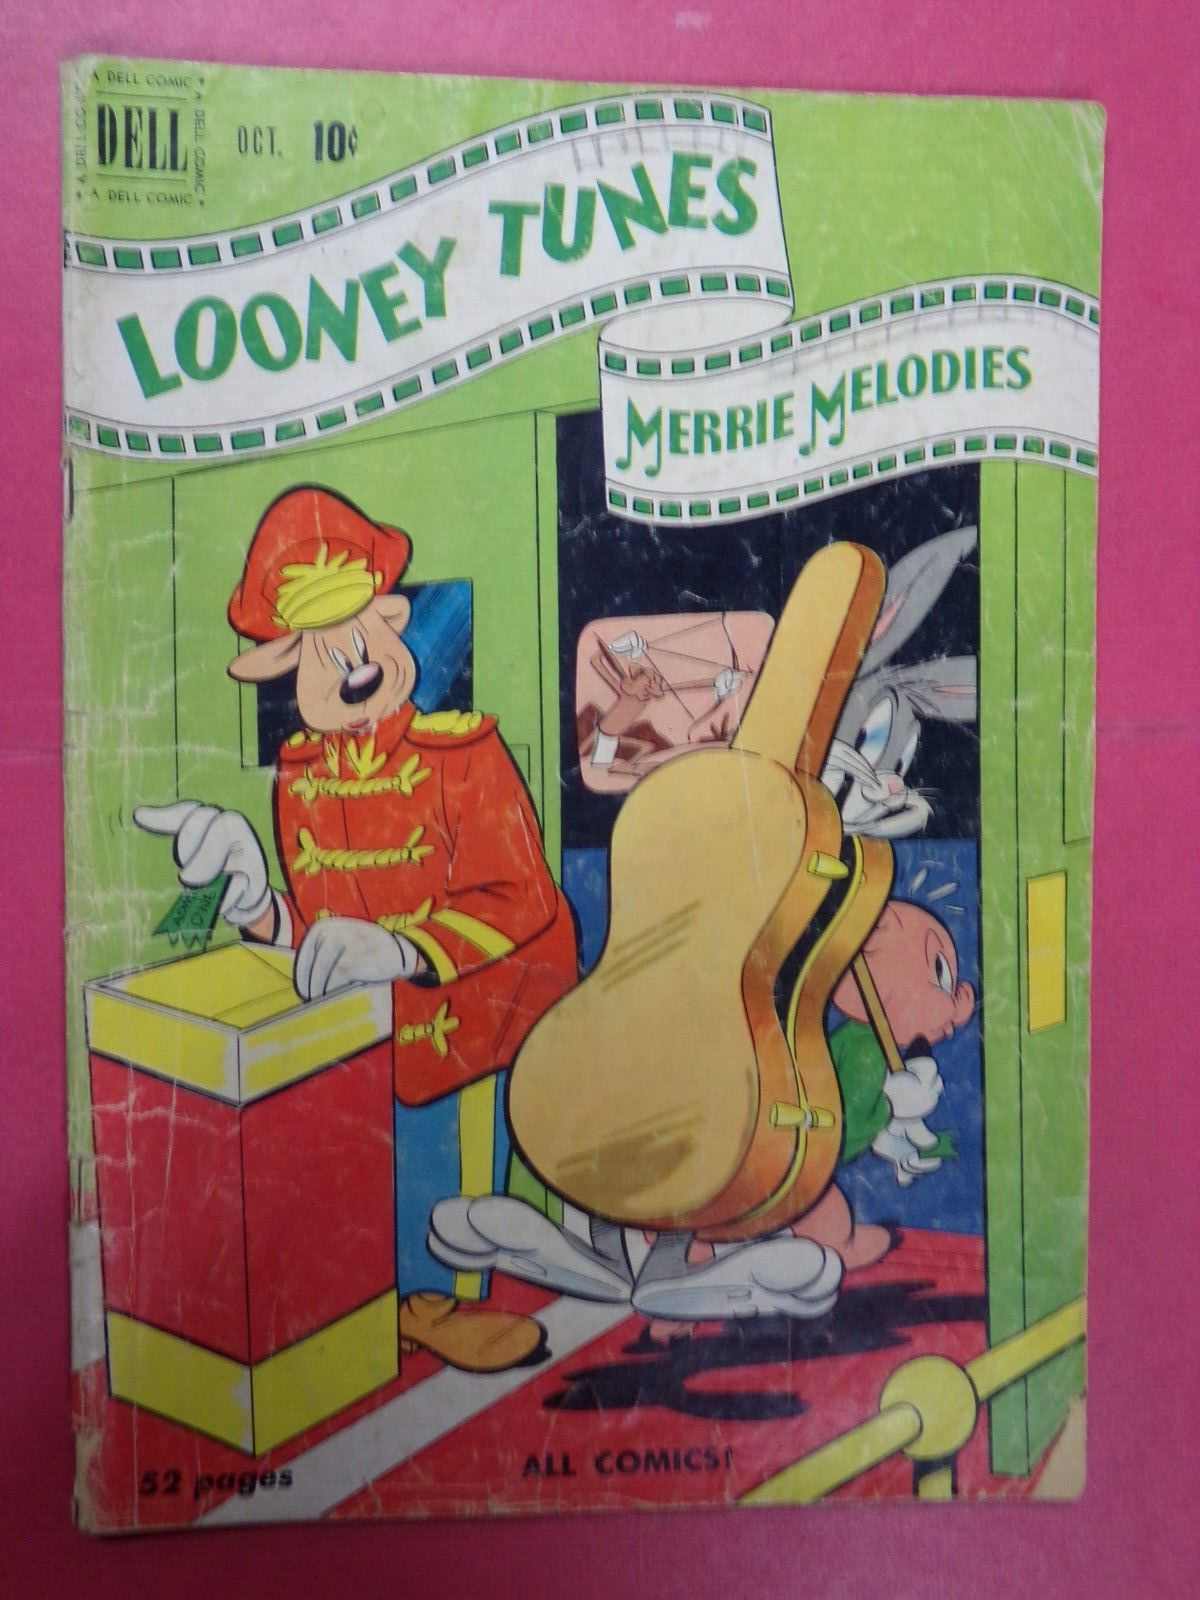 LOONEY TUNES and MERRIE MELODIES #108 GOLDEN AGE (1.8 Good-) 1950 DELL COMICS